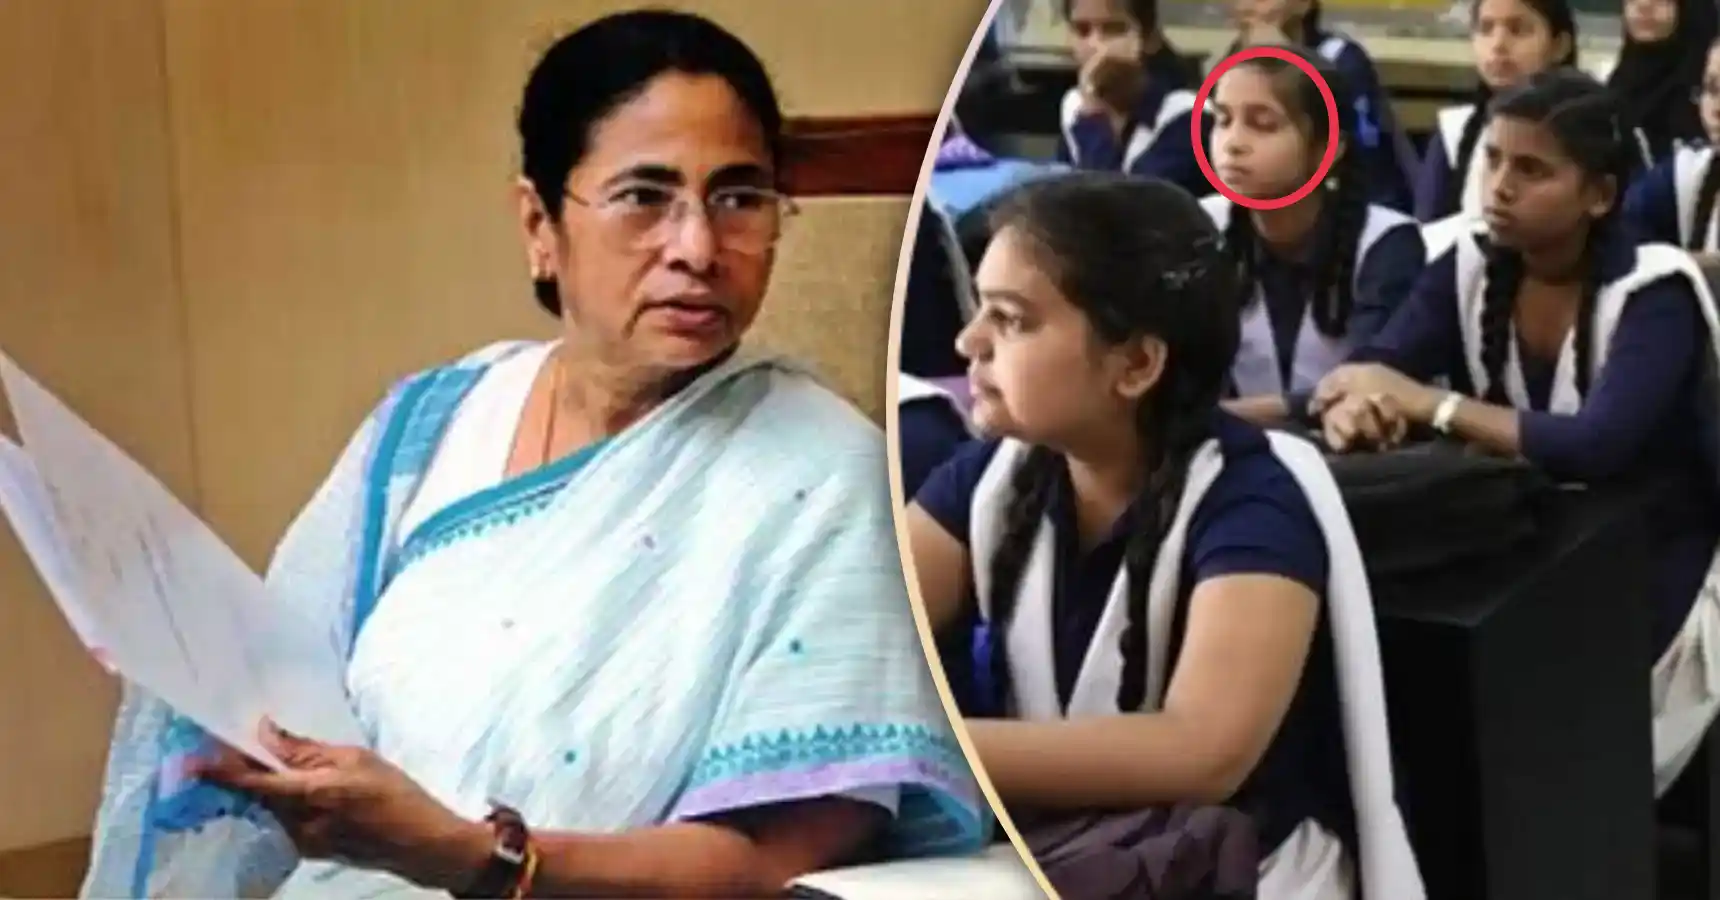 West Bengal Chief Minister Mamata Banerjee educational qualification